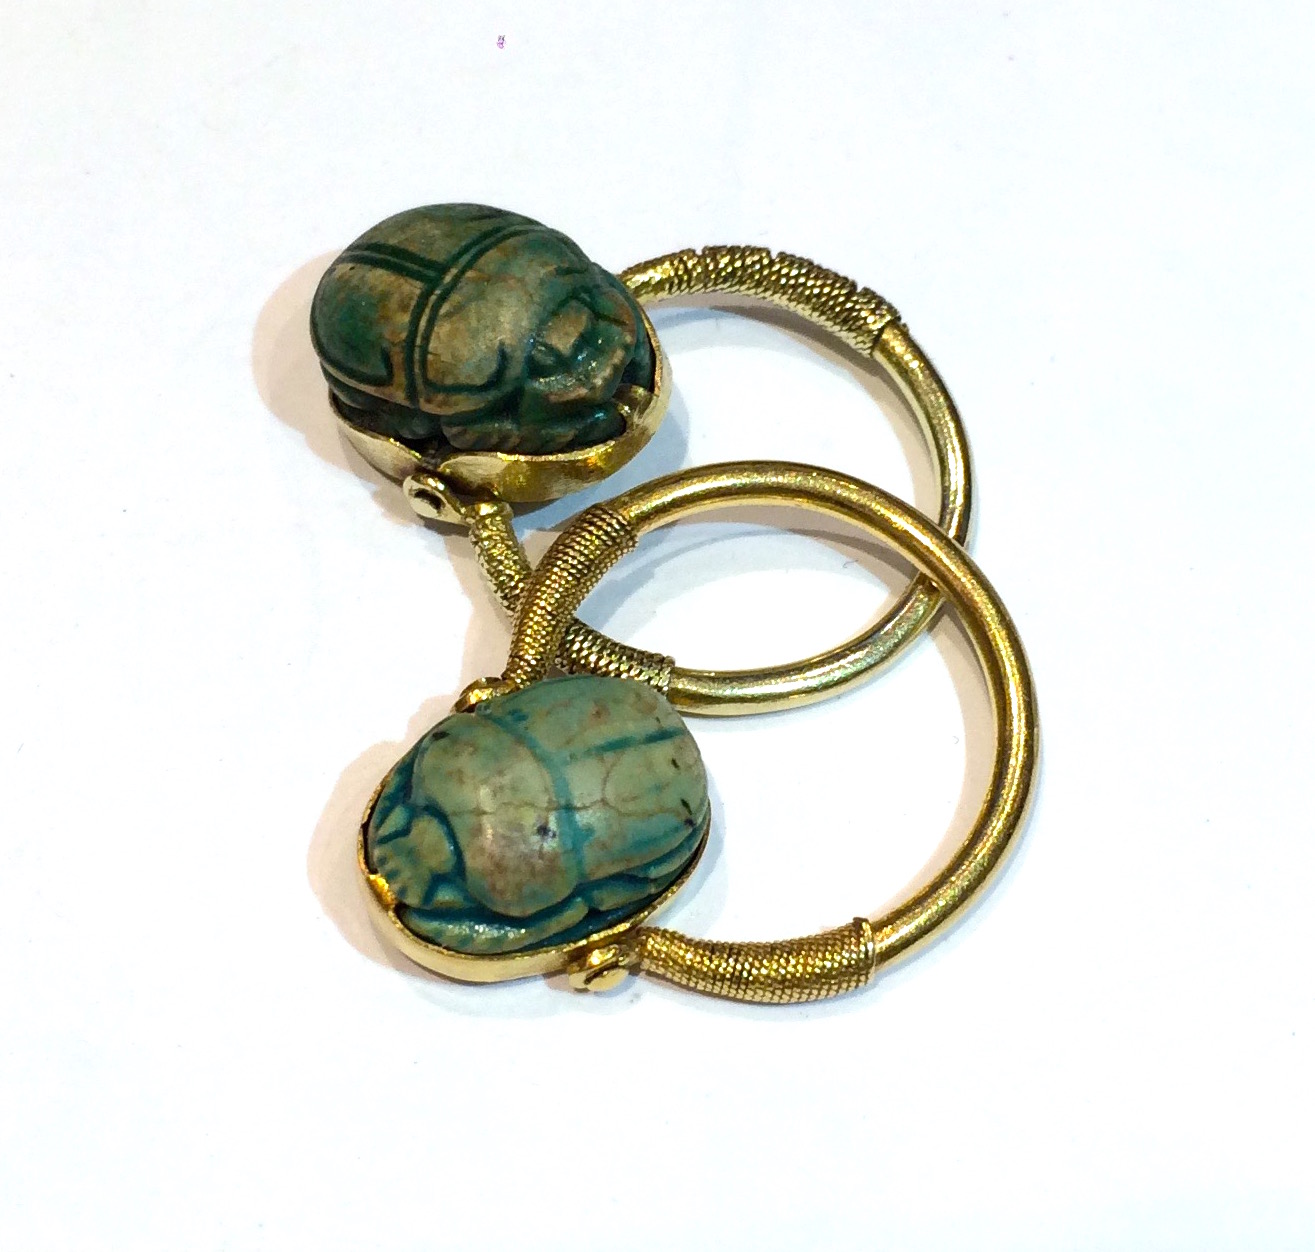 Late 19th Century Archeological Revival “Scarab” rings, 18K gold set with glazed ceramic scarabs, c. 1880’s